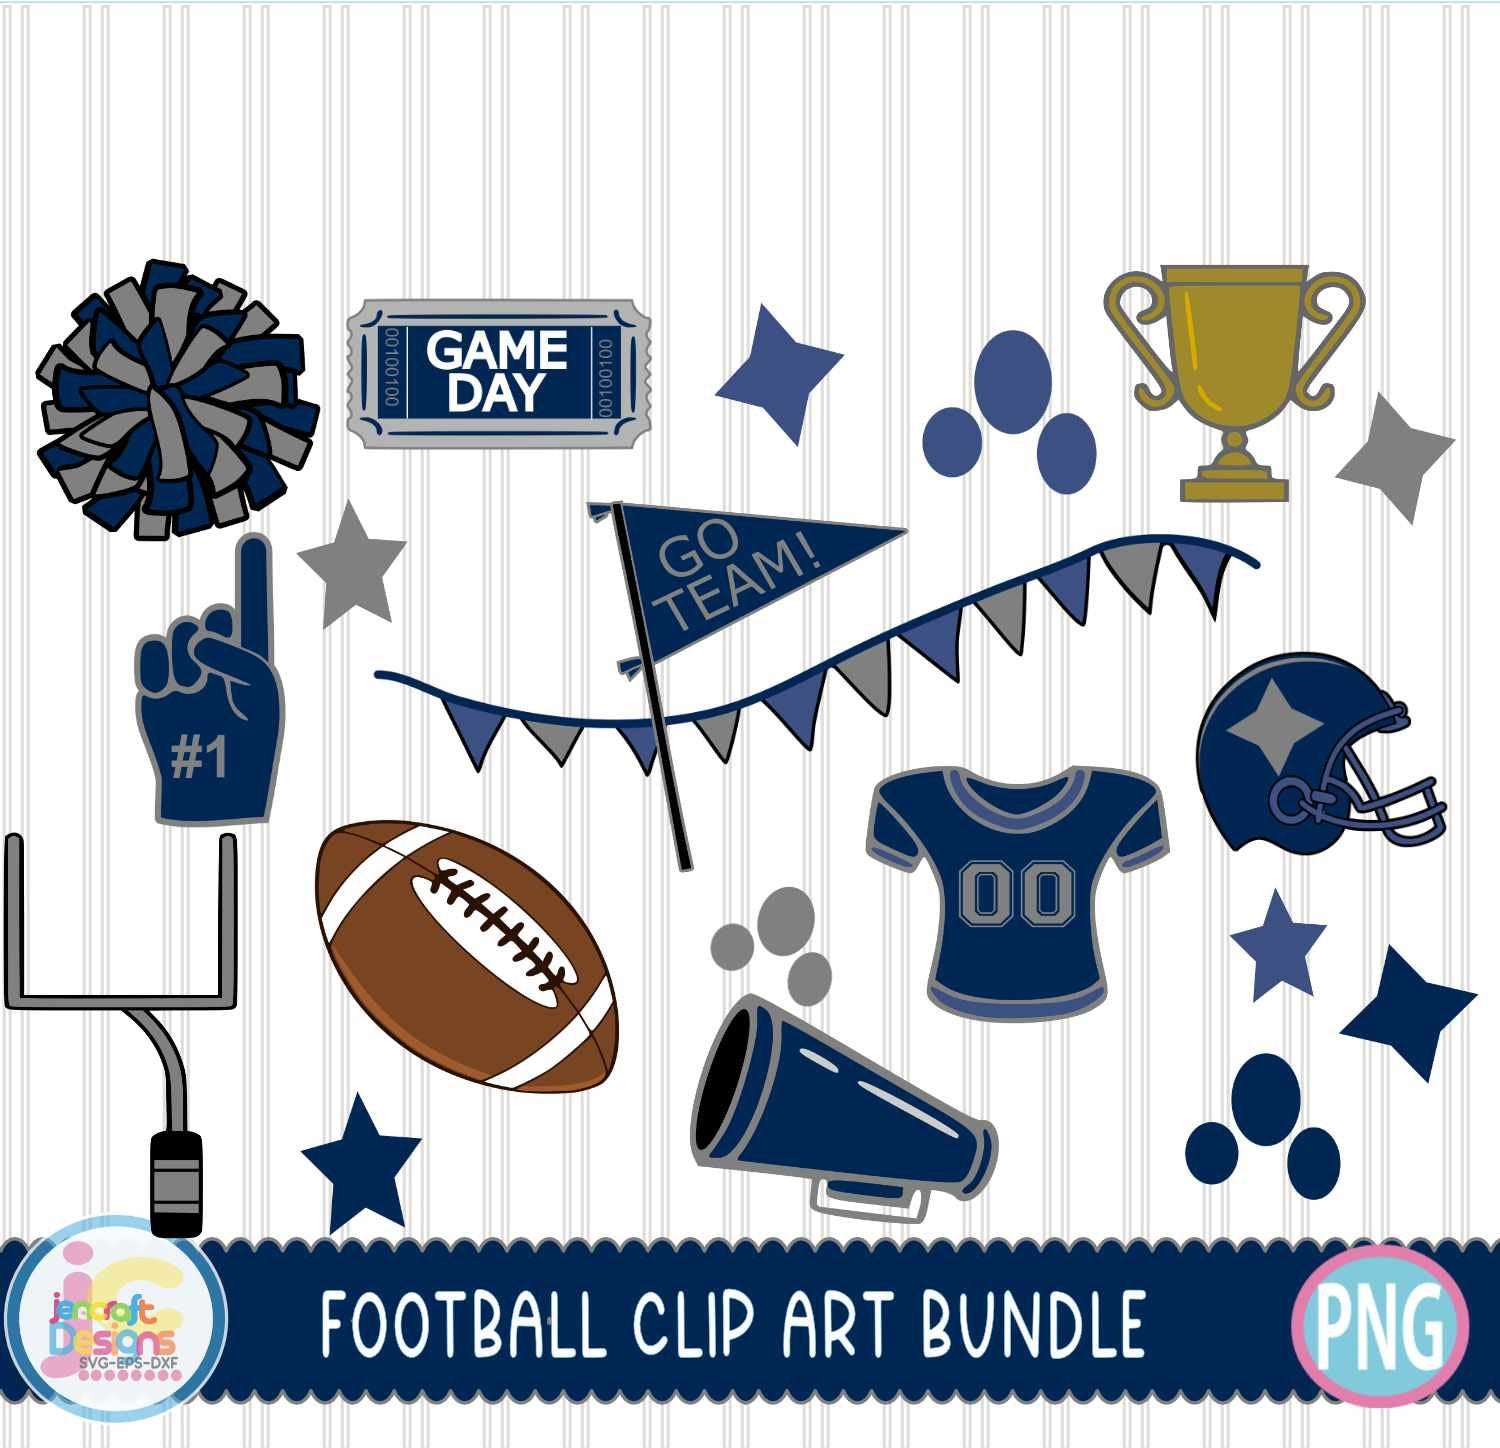 Blue and Grey Football Doodle Letters Alphabet Png Print File for Sublimation or Printing - JenCraft Designs